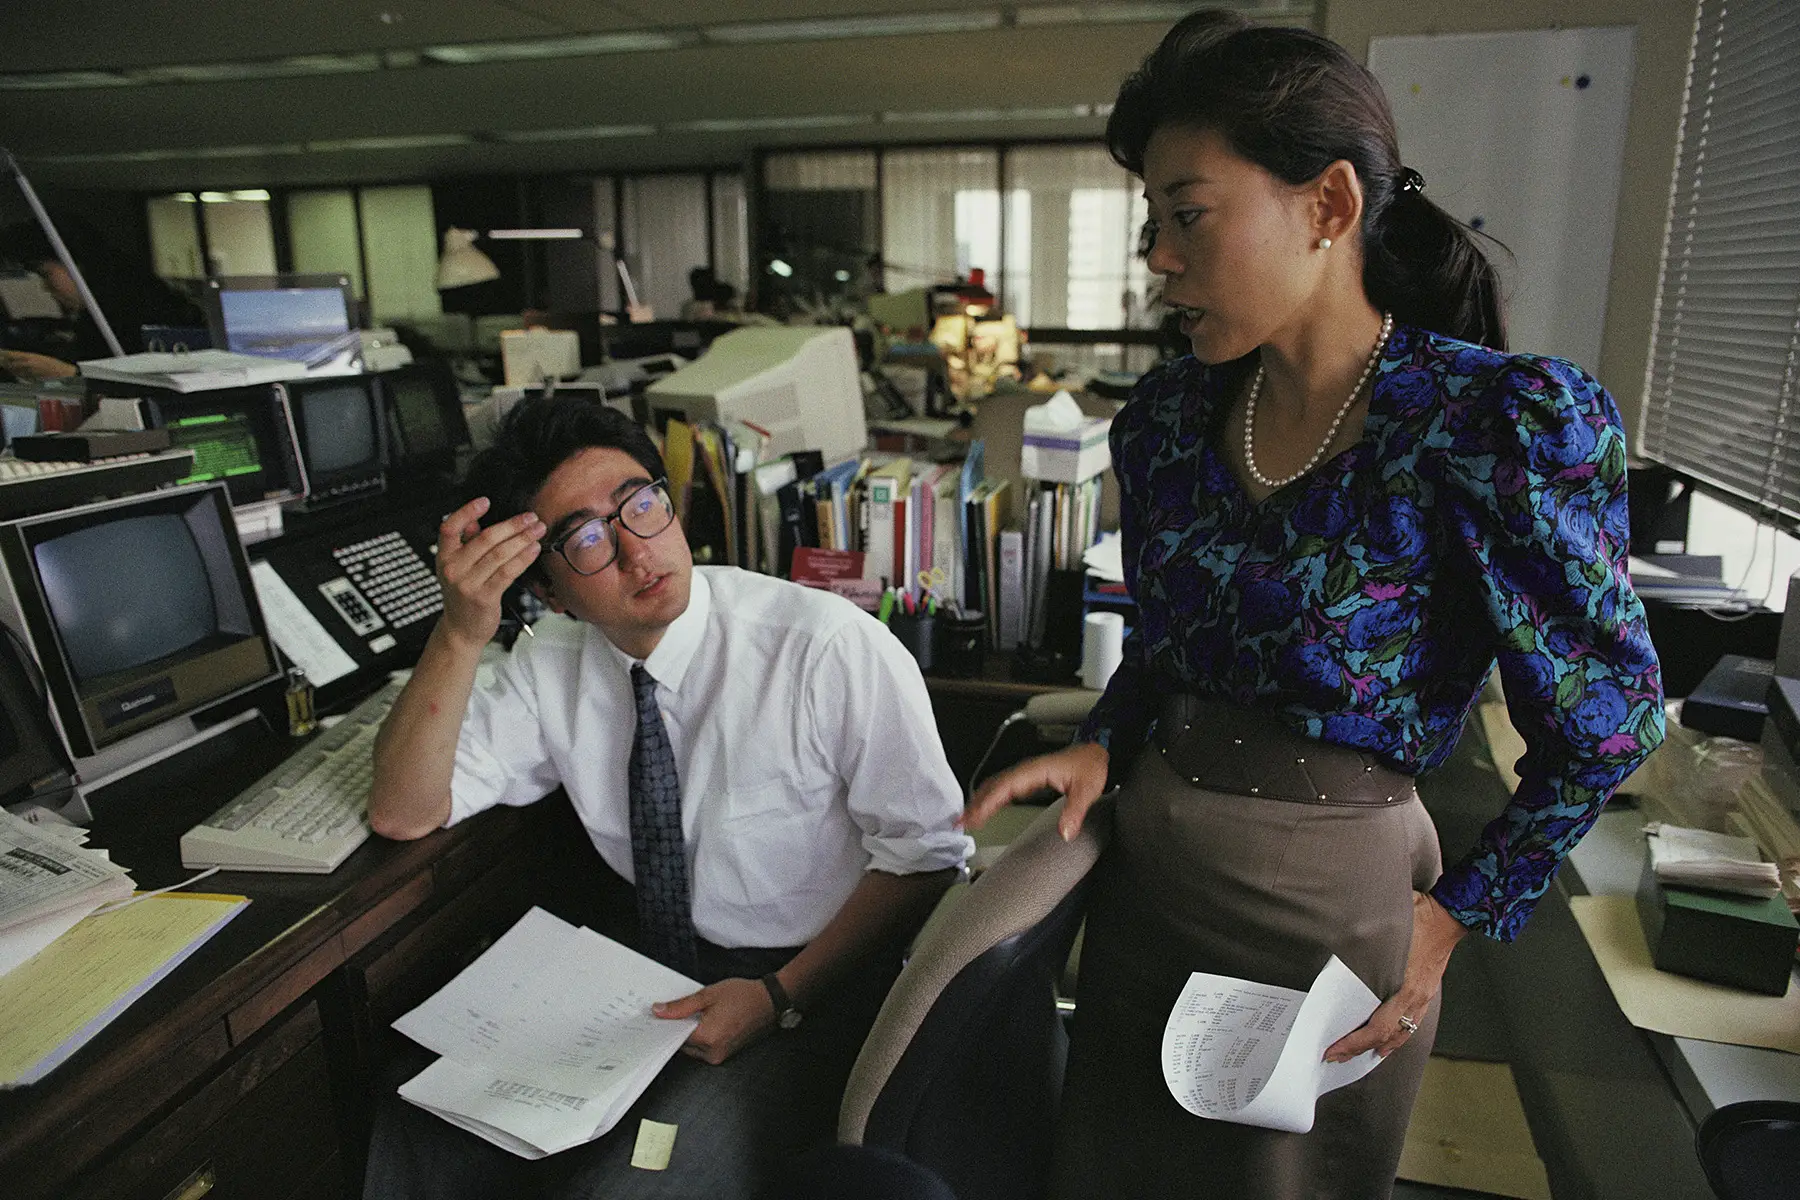 Junko Yoda, vice president at Goldman Sachs, standing by a male employee in her offices in 1989